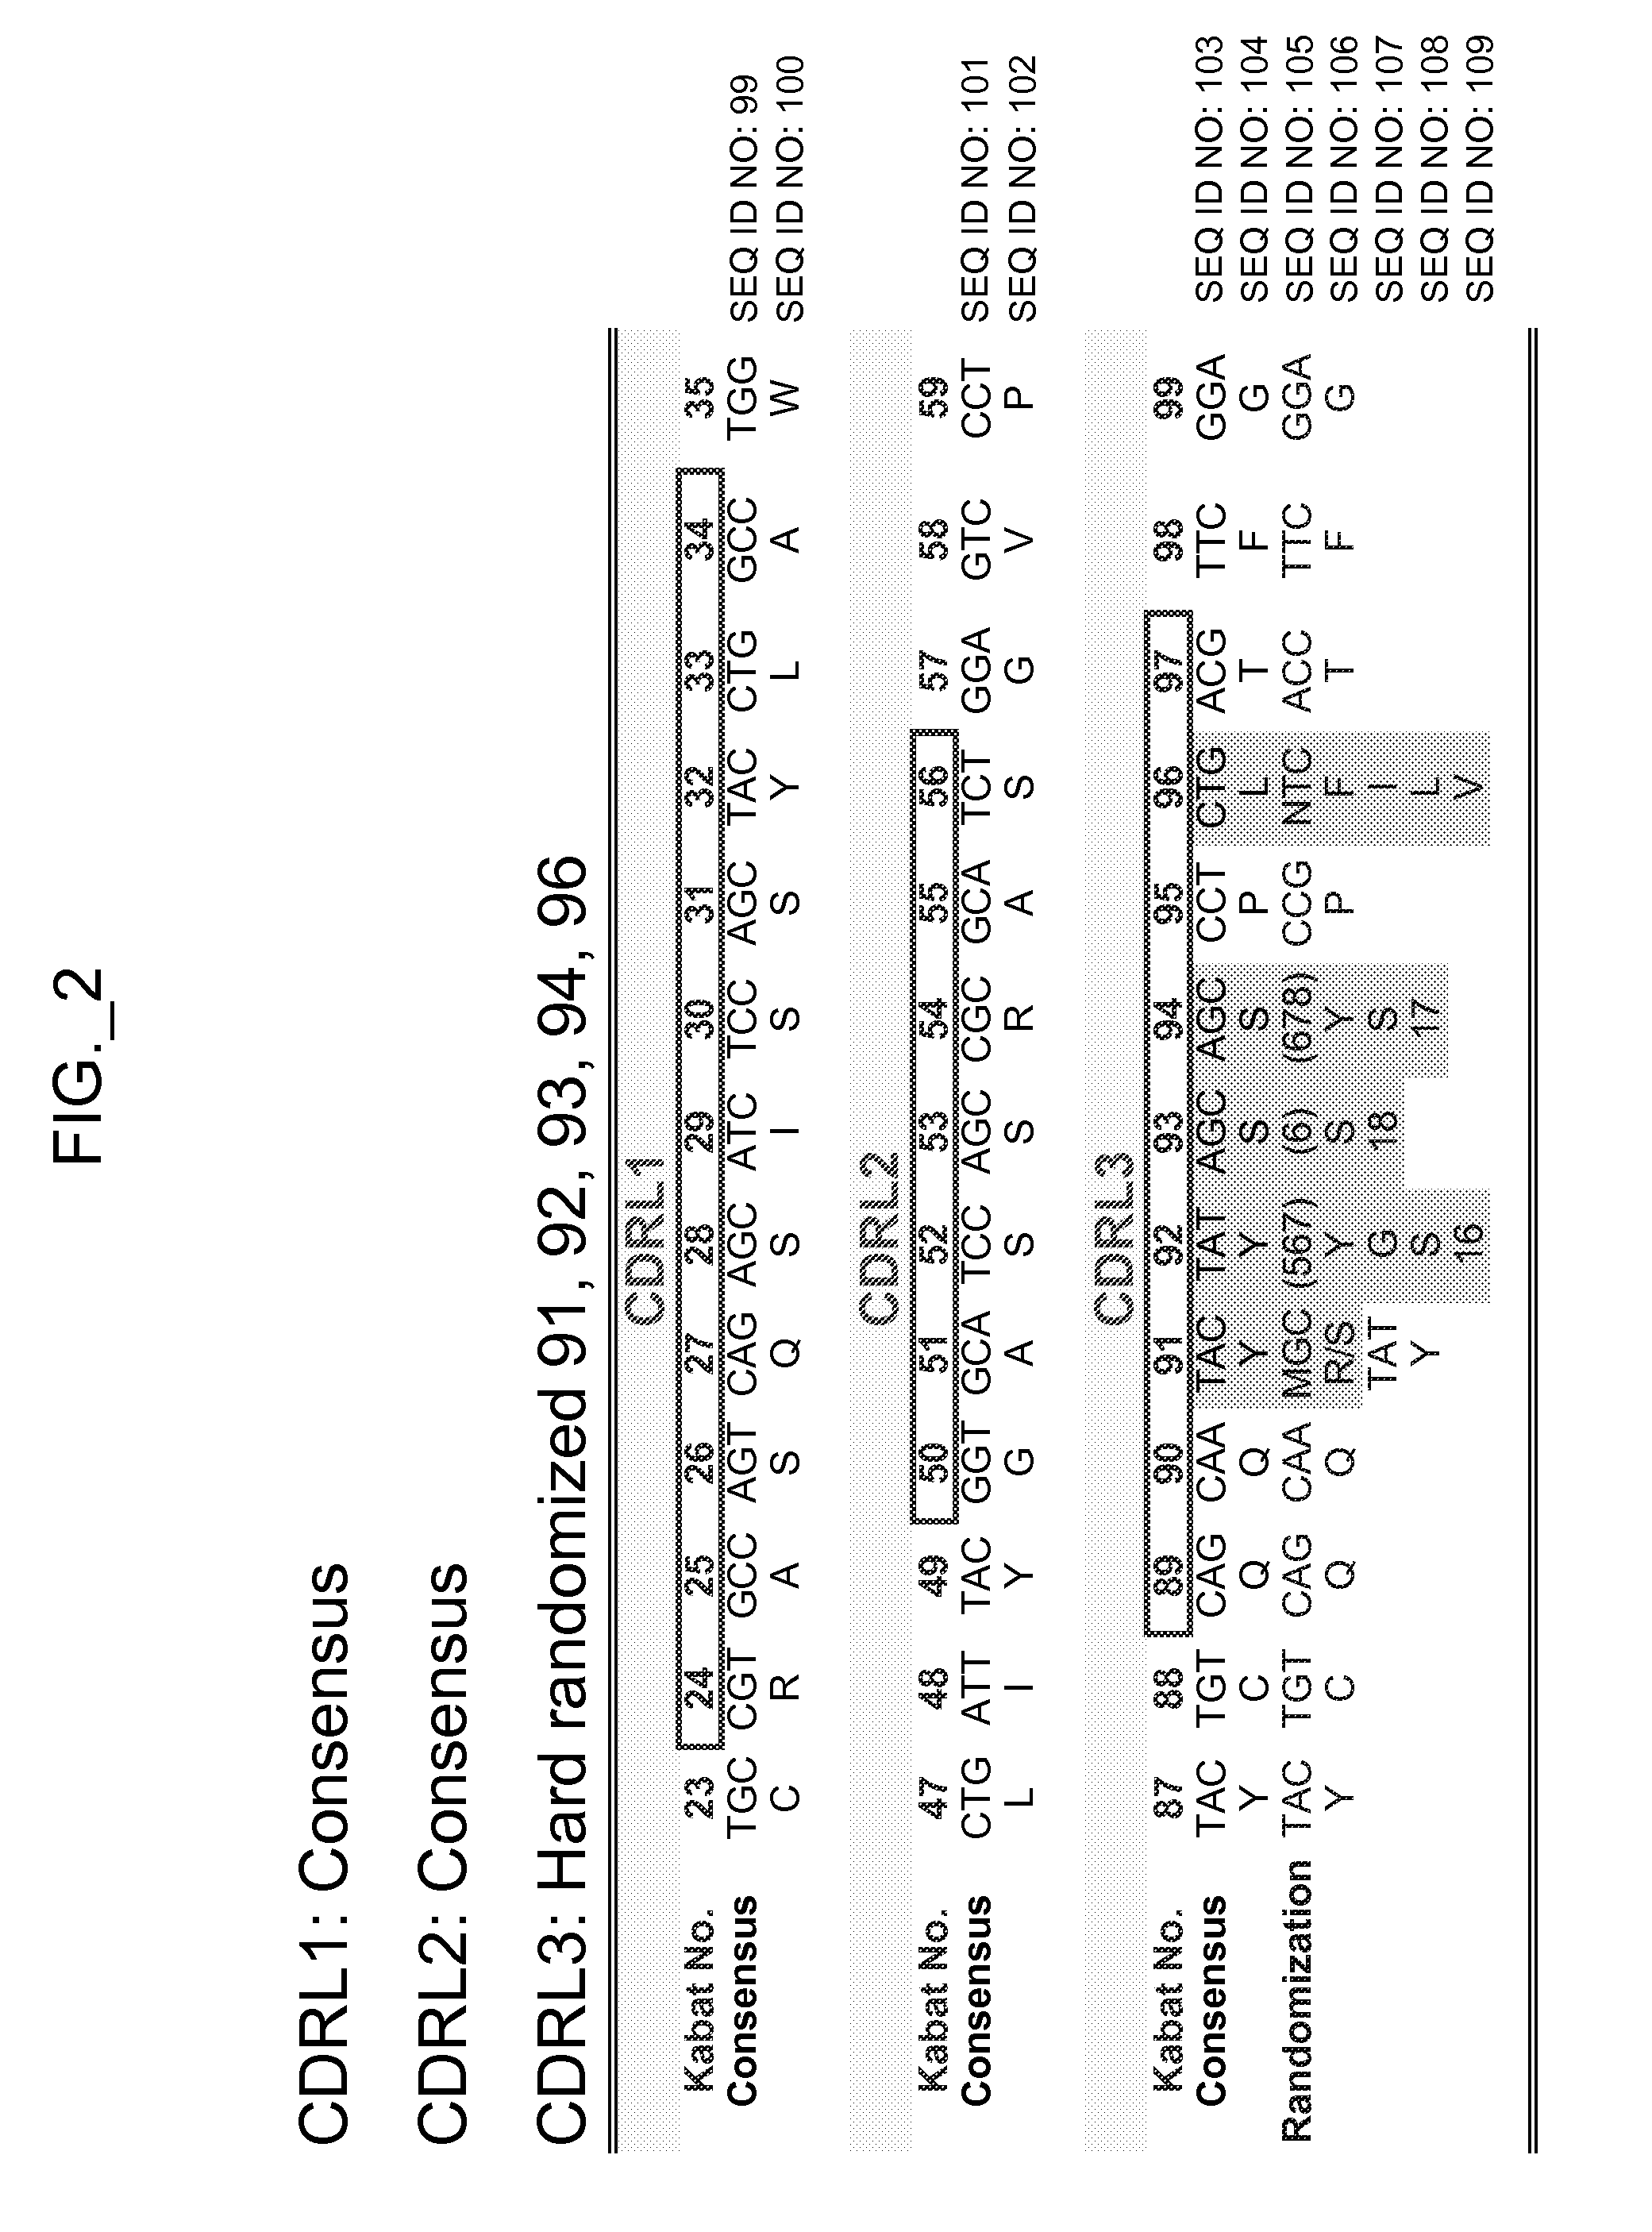 Binding polypeptides with diversified and consensus VH/VL hypervariable sequences